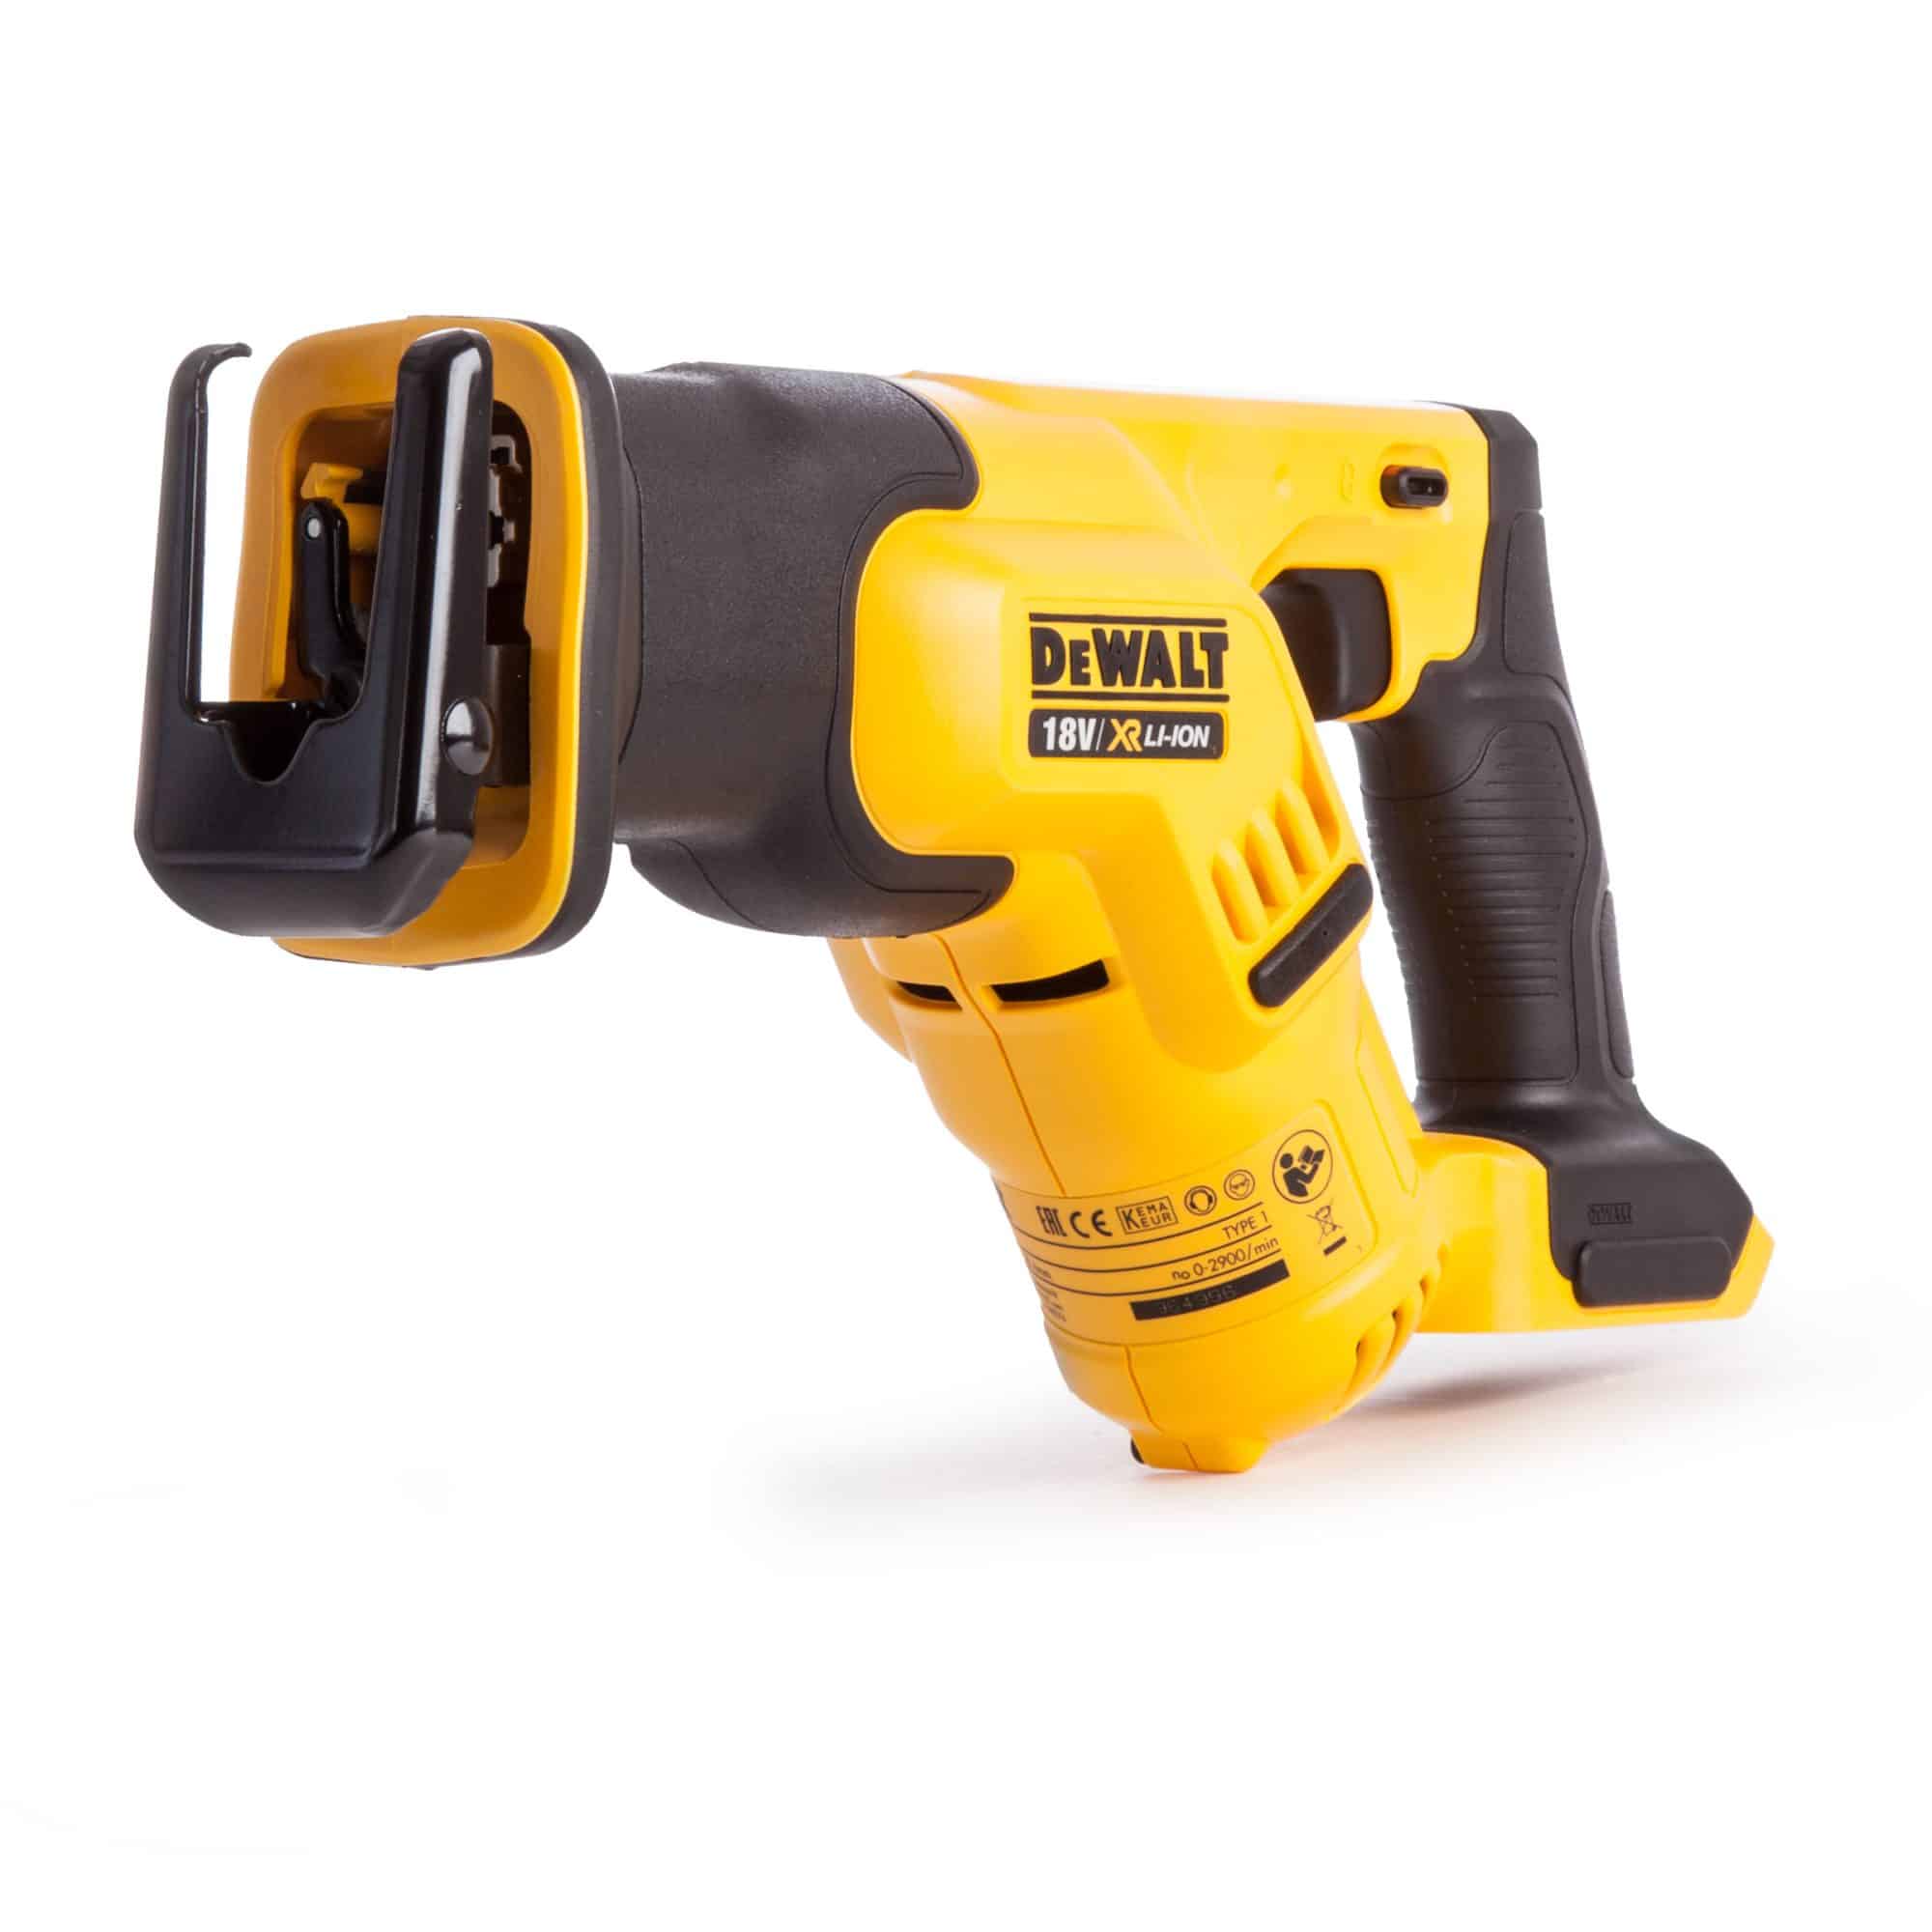 Best Cordless Reciprocating Saw Our Top 3 Review ToolsReview.uk